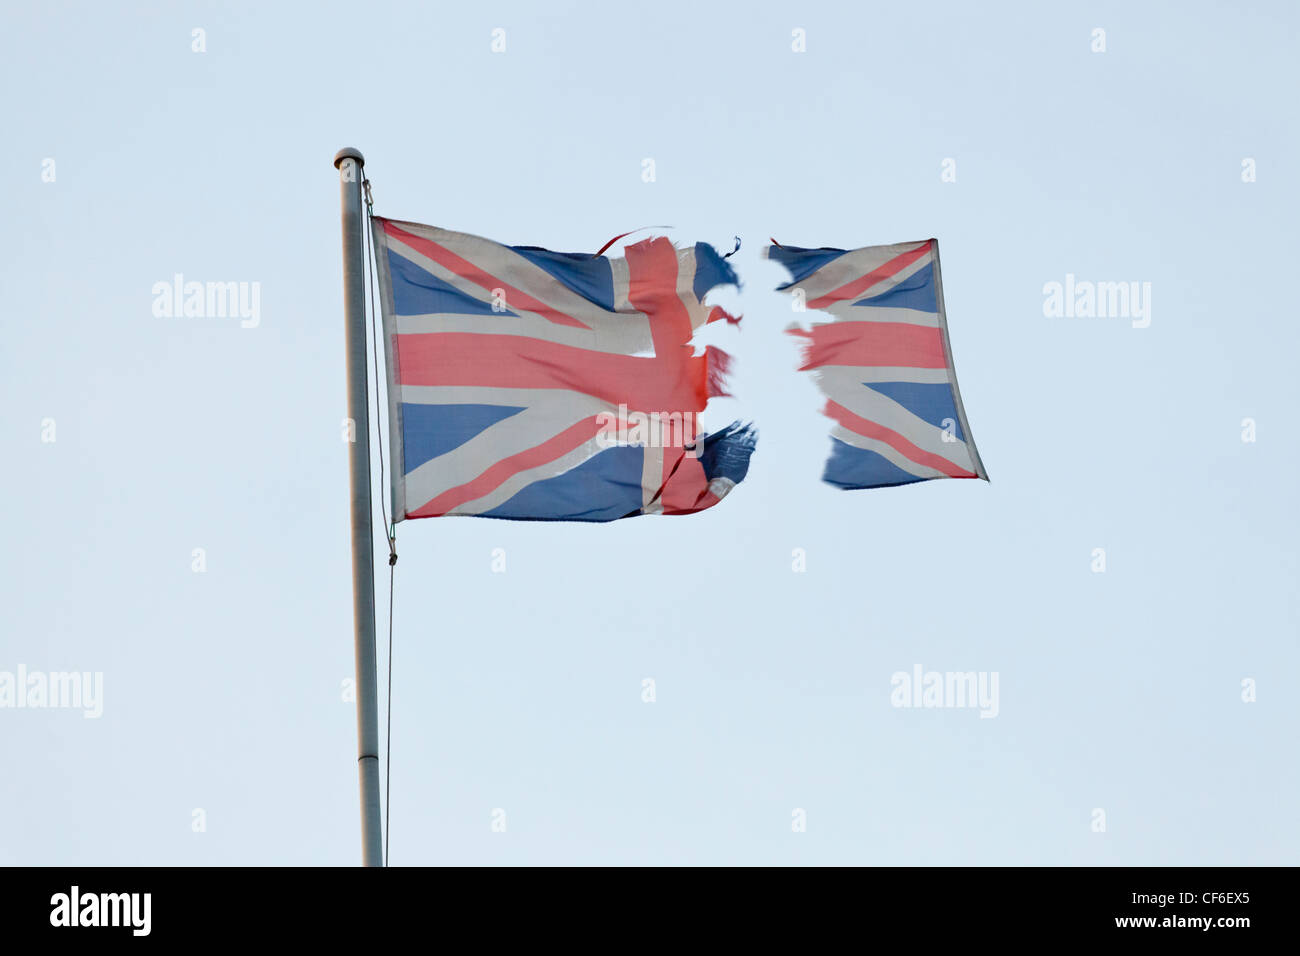 Torn Union Jack. Ripped UK flag in two pieces with one section flying away, suggesting an independence, devolution or Brexit concept Stock Photo